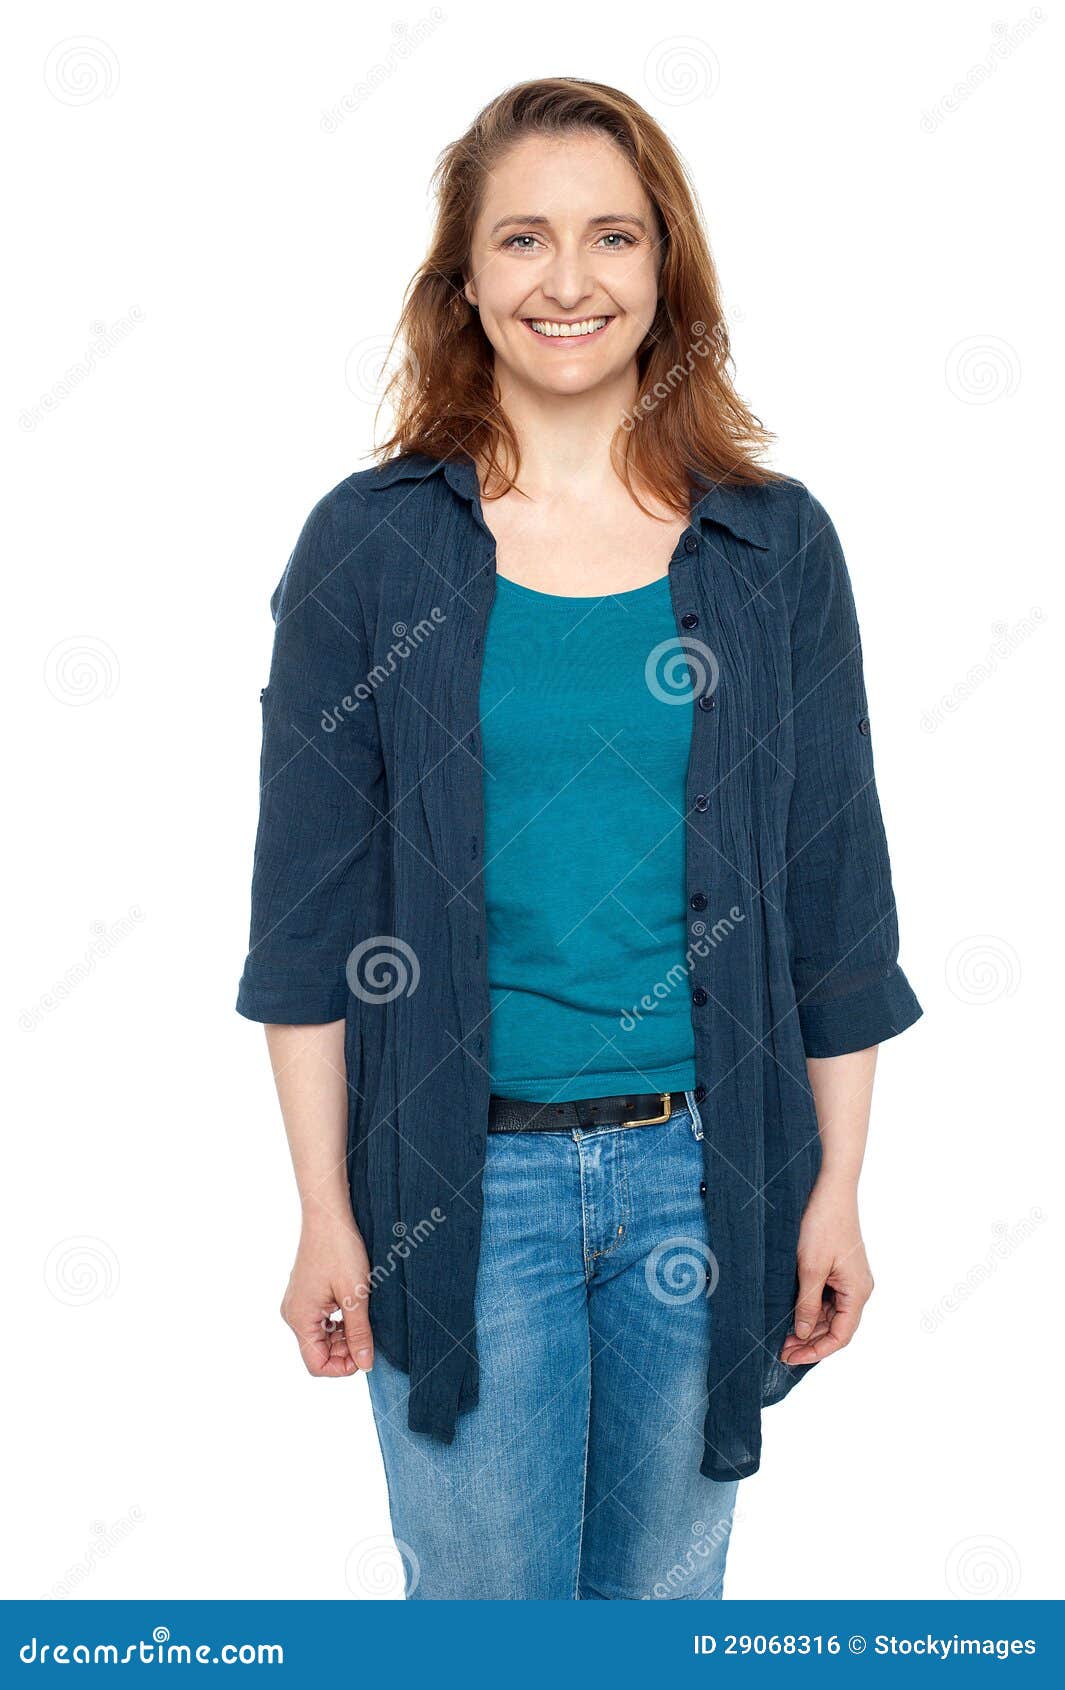 smiling middle aged woman wearing blue cardigan